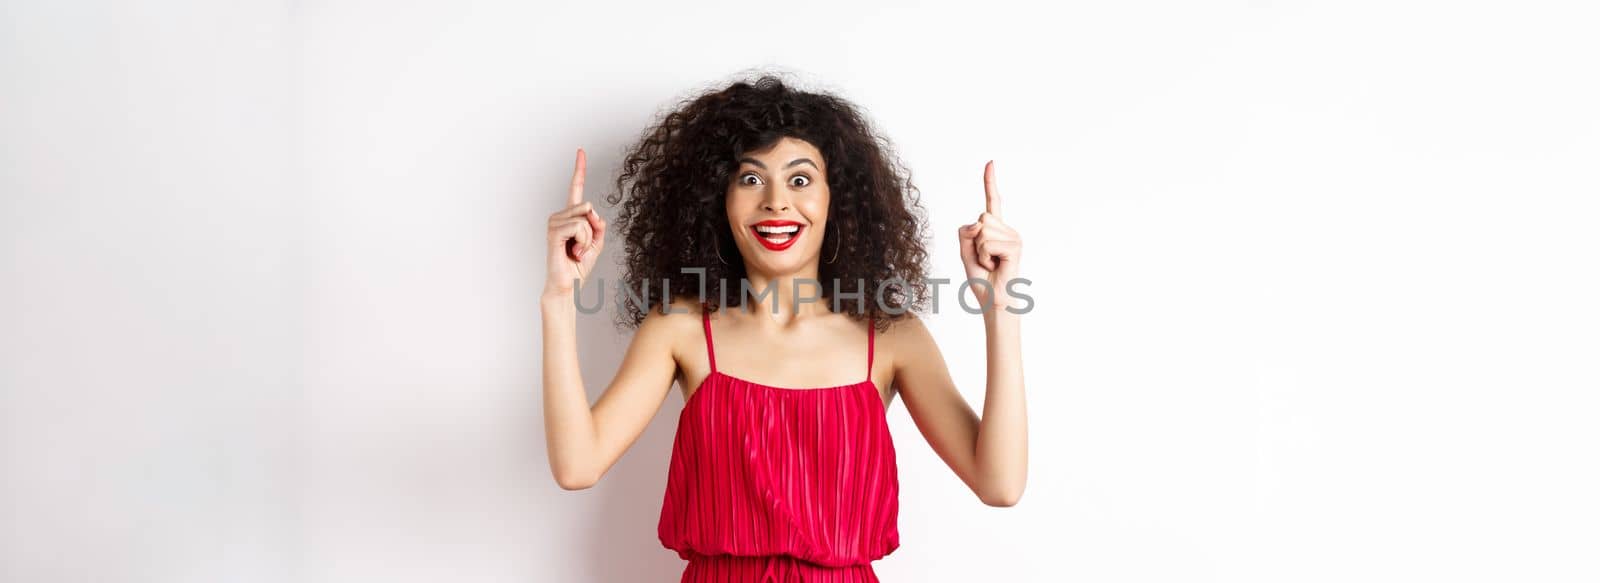 Happy elegant woman in red dress and makeup, smiling amused and pointing fingers up at logo, showing advertisement, standing over white background by Benzoix